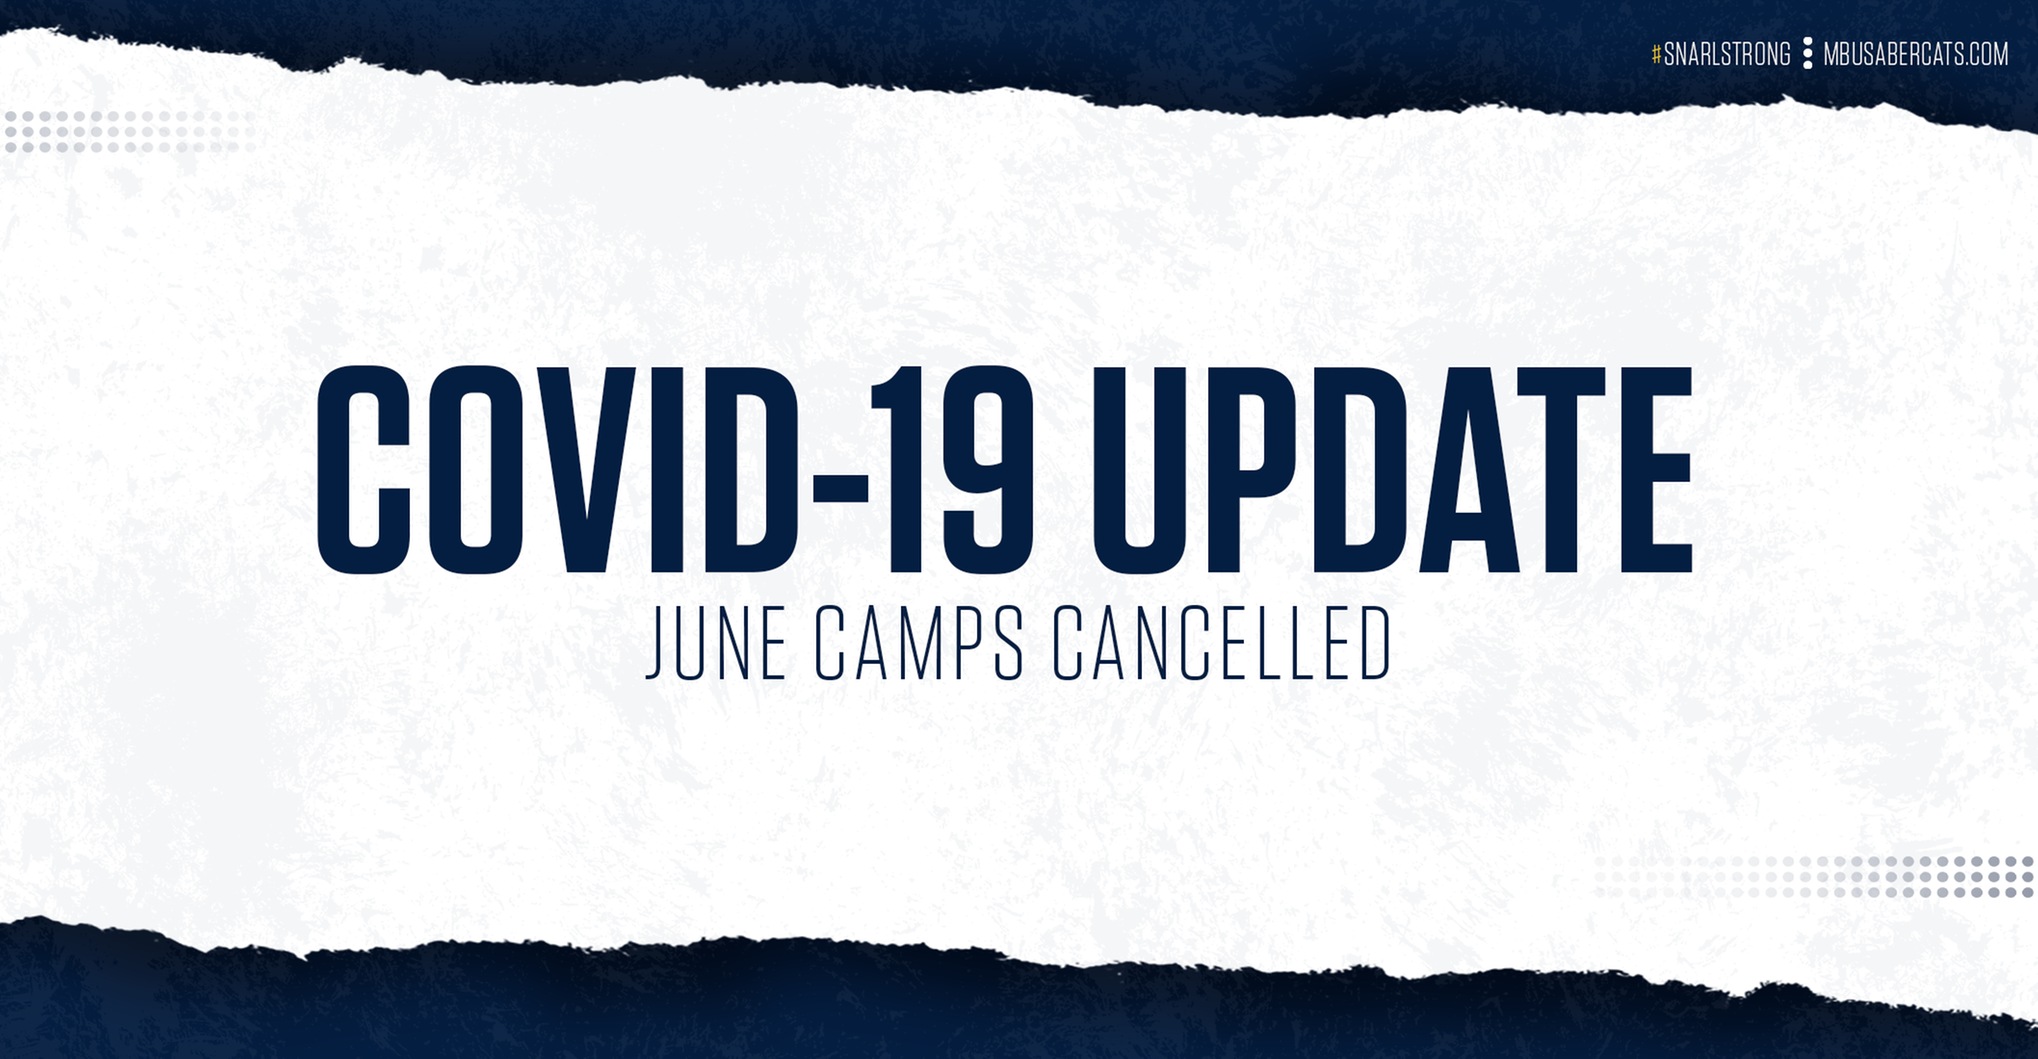 June Camps Cancelled